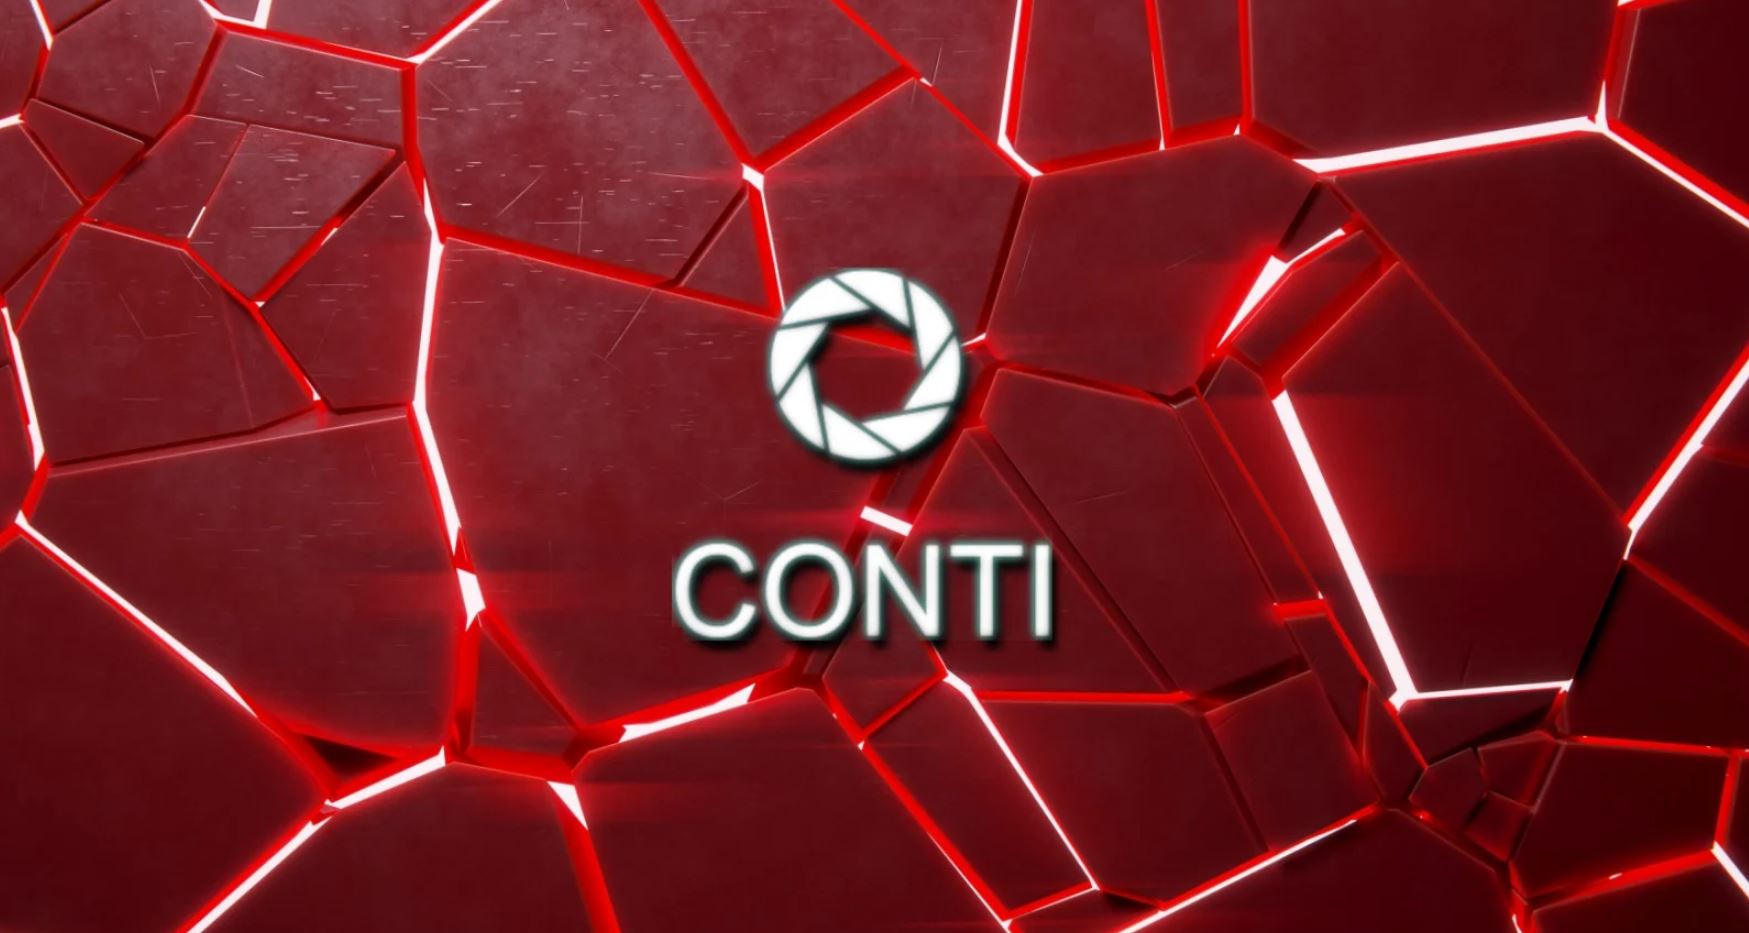 Notorious ransomware gang Conti shuts down, but not for good